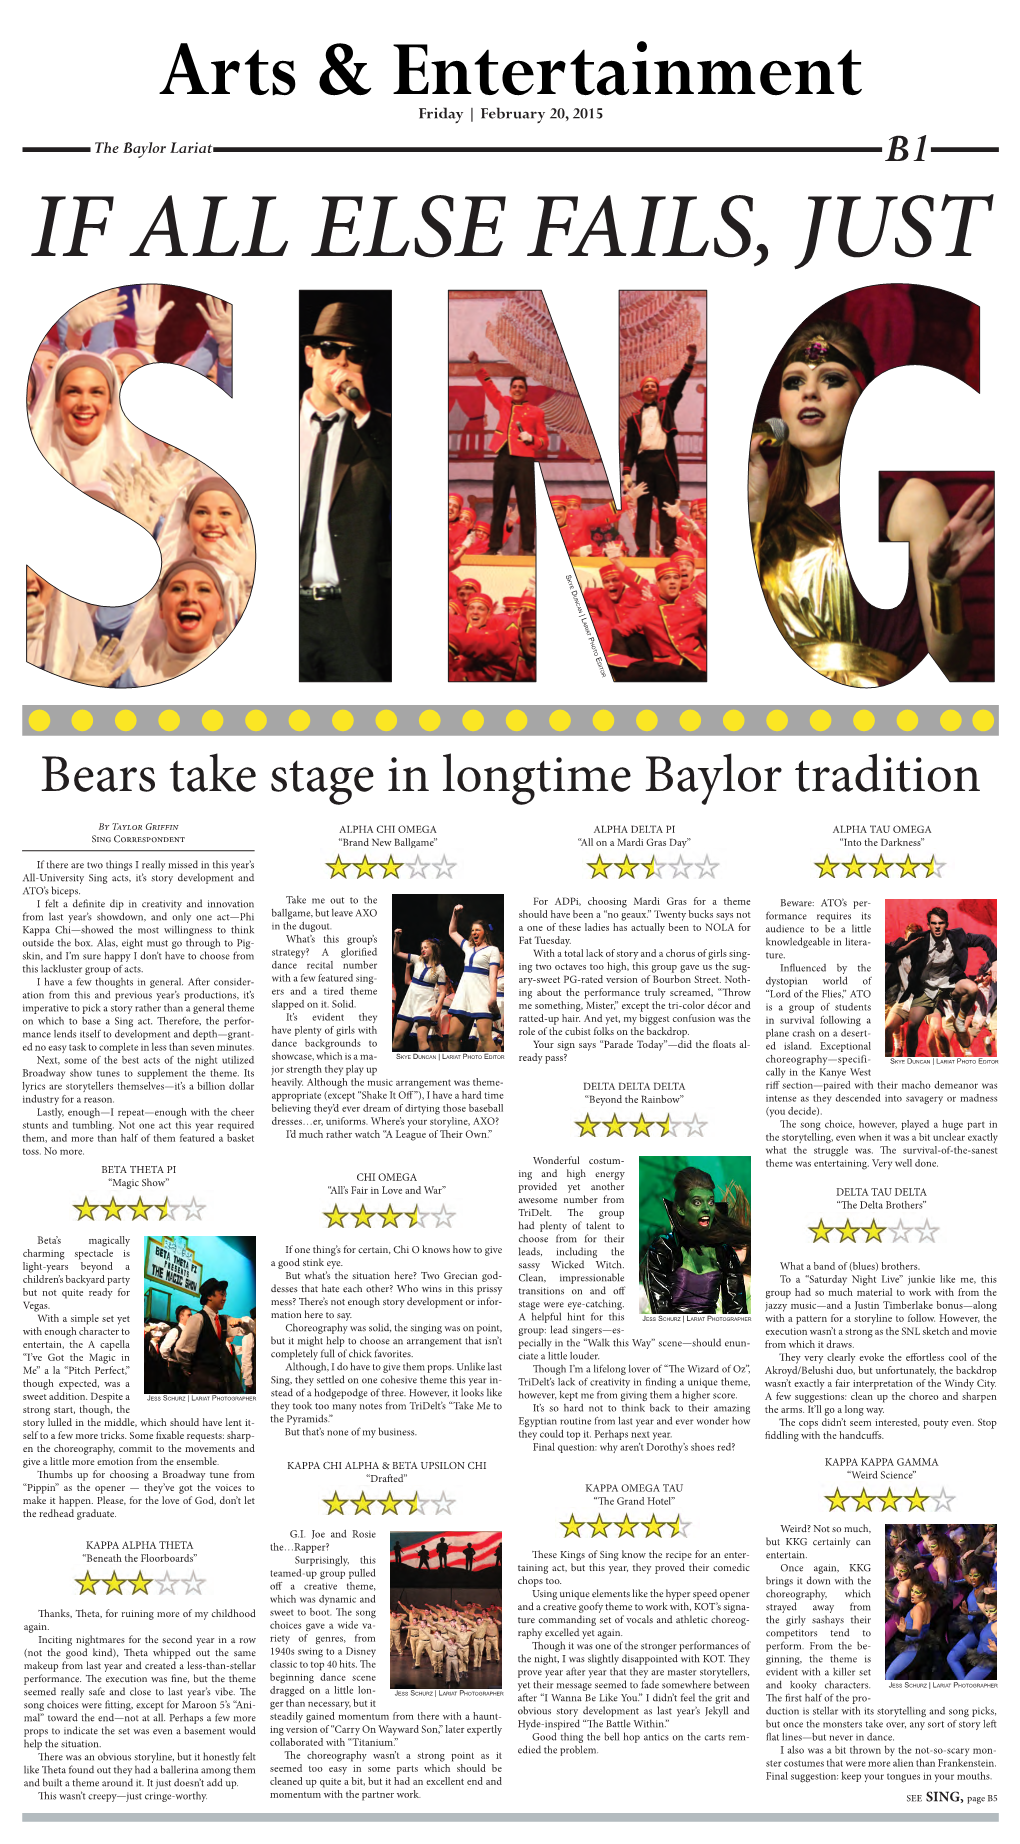 Bears Take Stage in Longtime Baylor Tradition